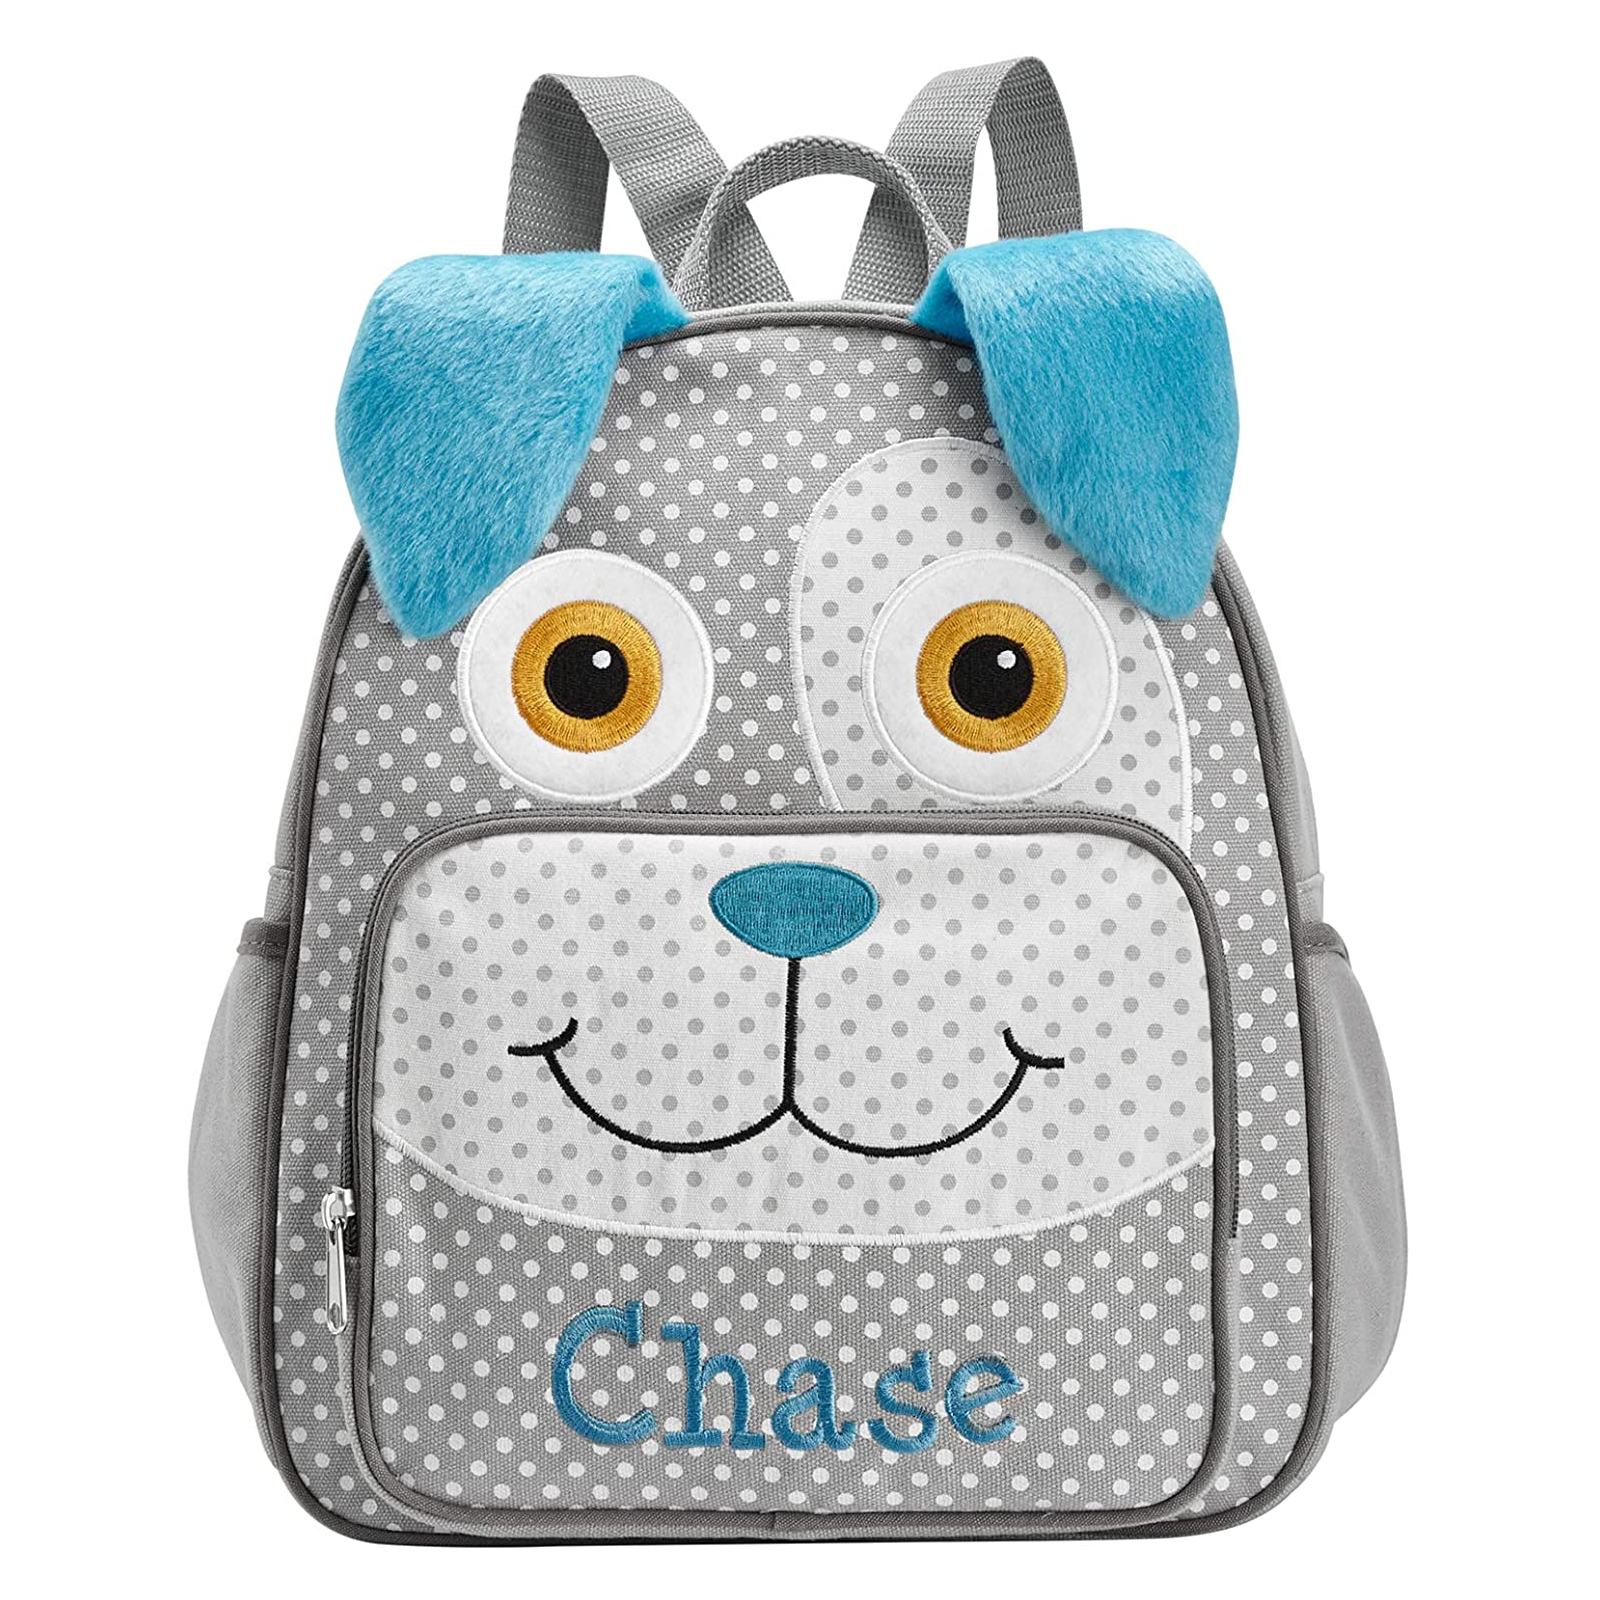 Let's Make Memories Personalized Dog Design Backpack Front View